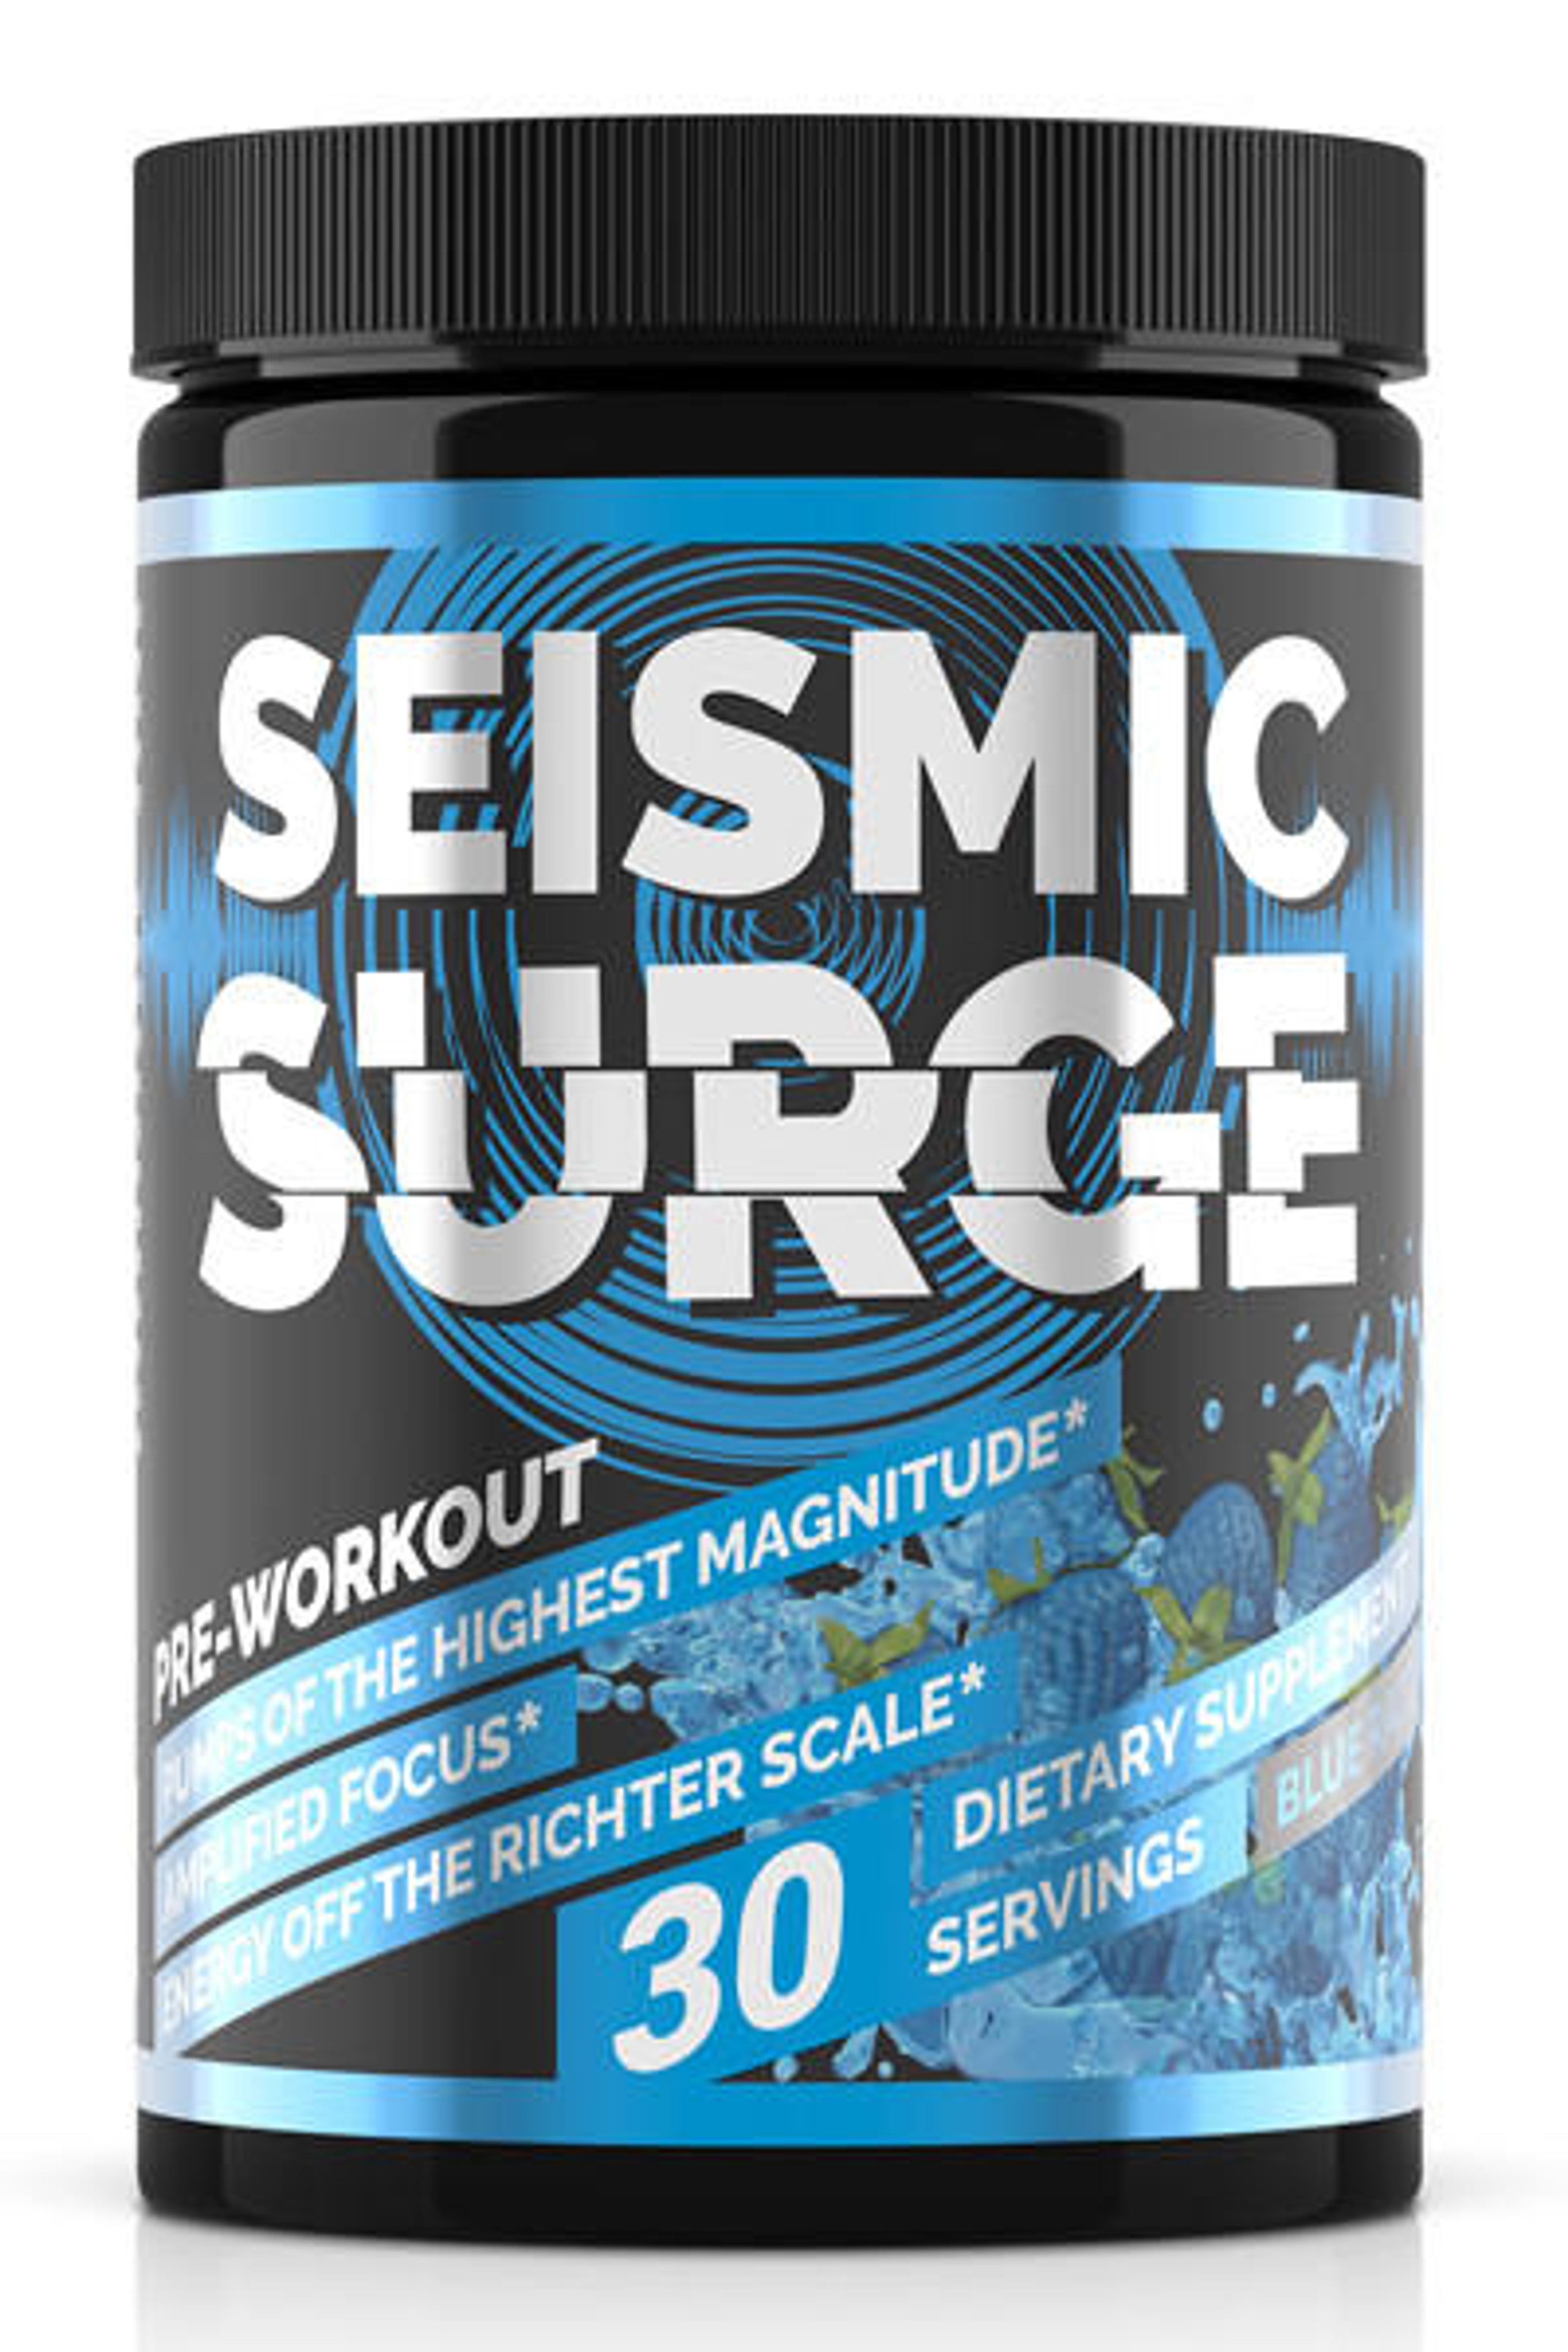 Seismic Surge by Hard Rock Supplements